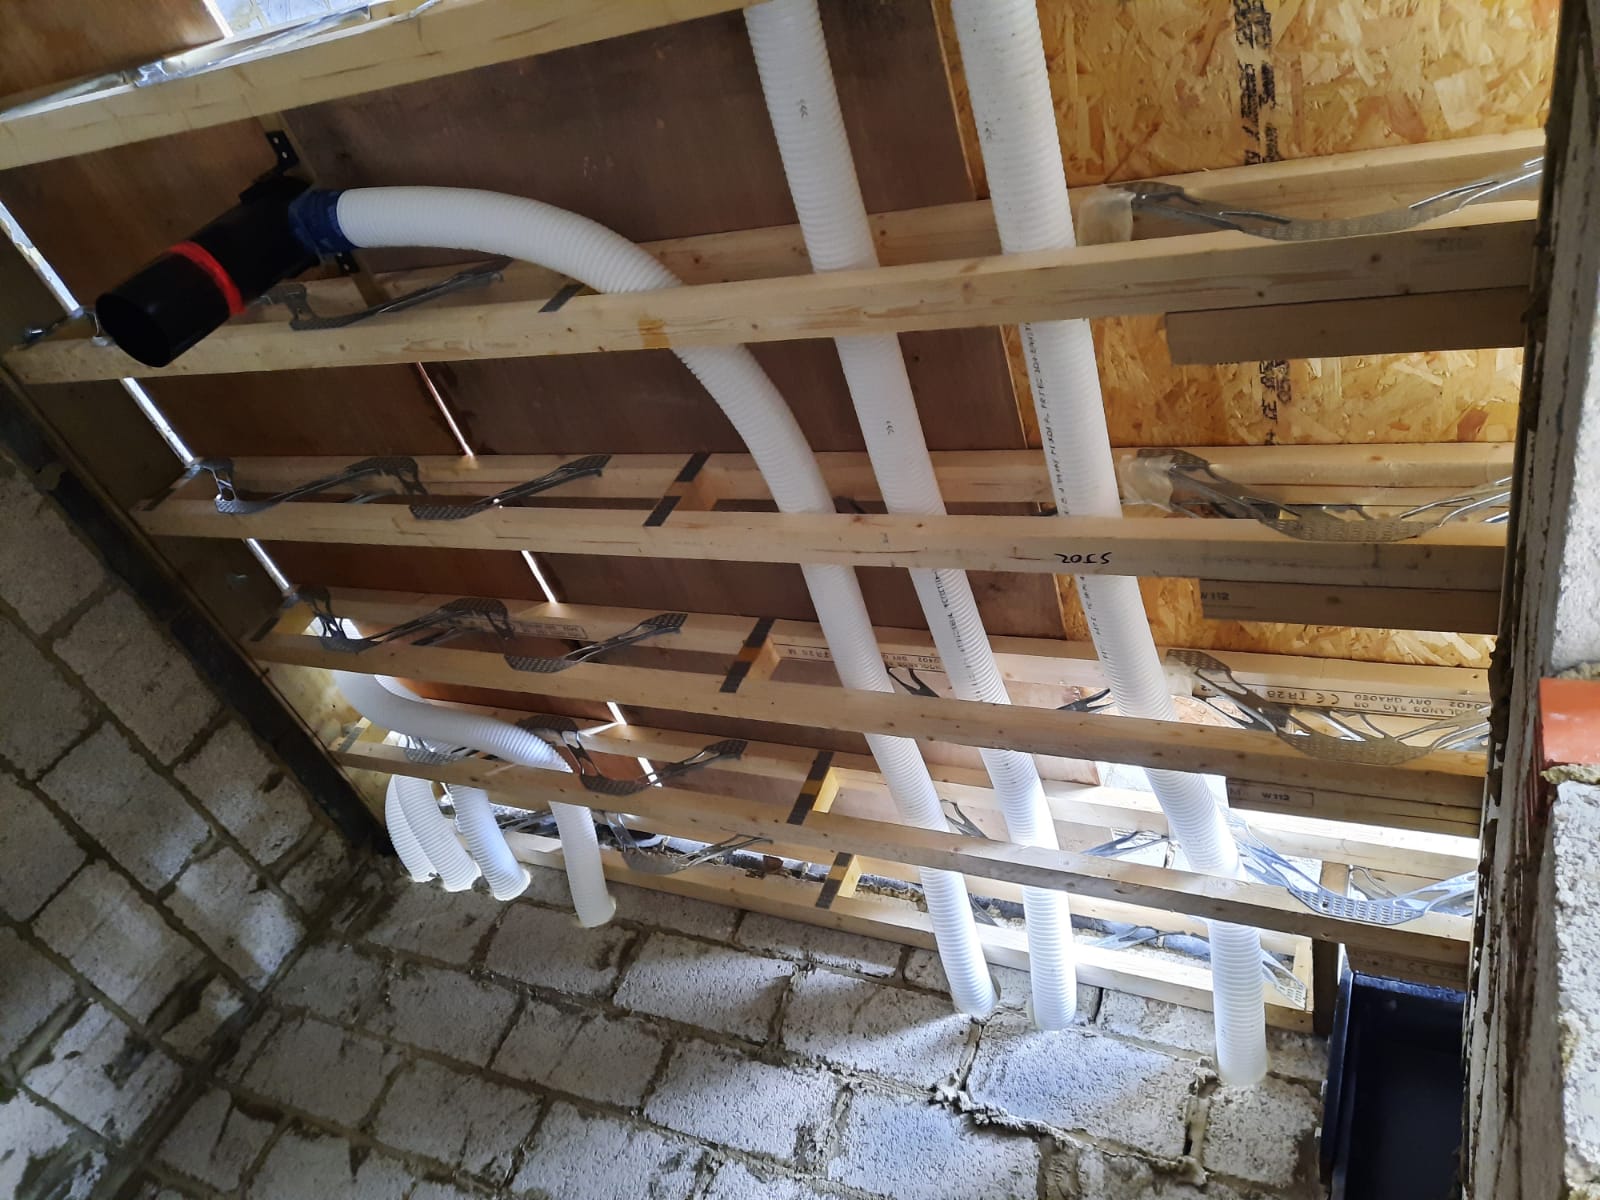 90mm semi-rigid ducting in webbed joists and passing through core-drilled blockwork wall for MVHR system